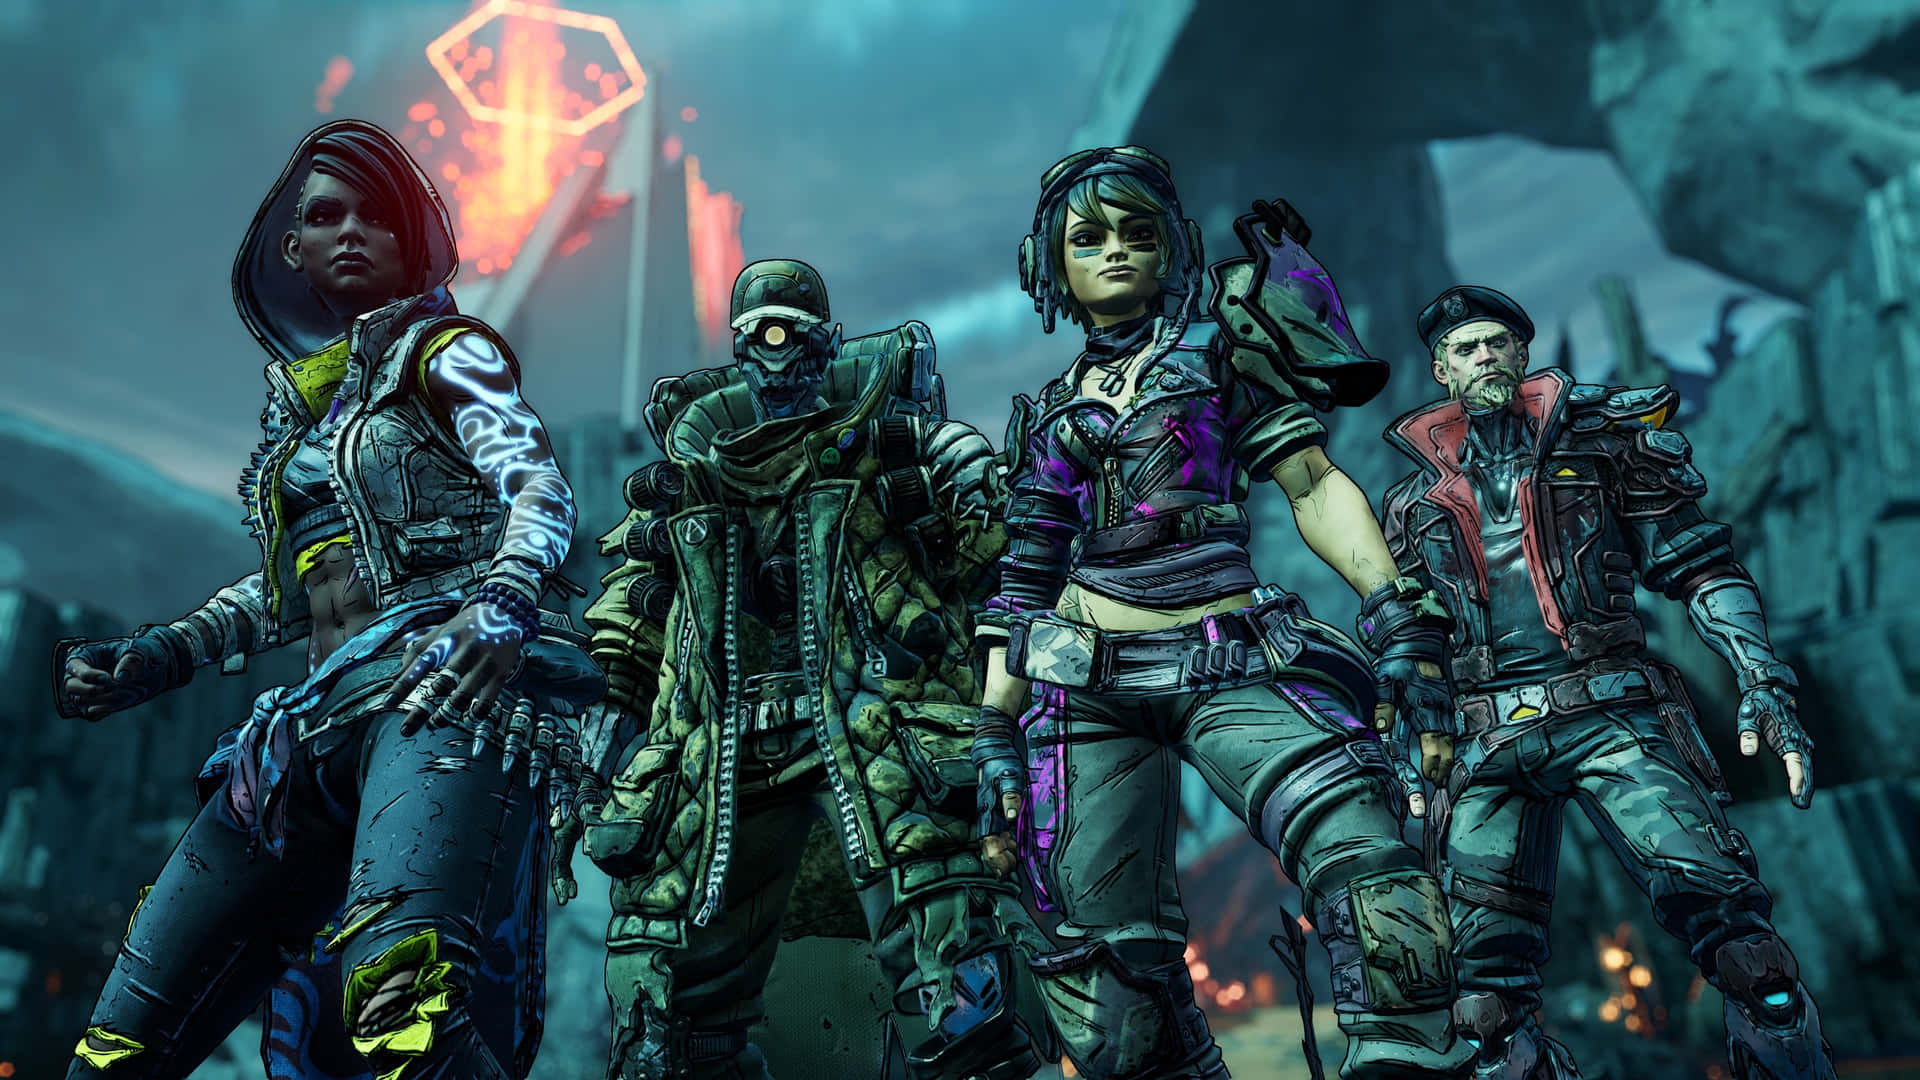 Get Ready for a Heart-Pounding Adventure with Borderlands 3